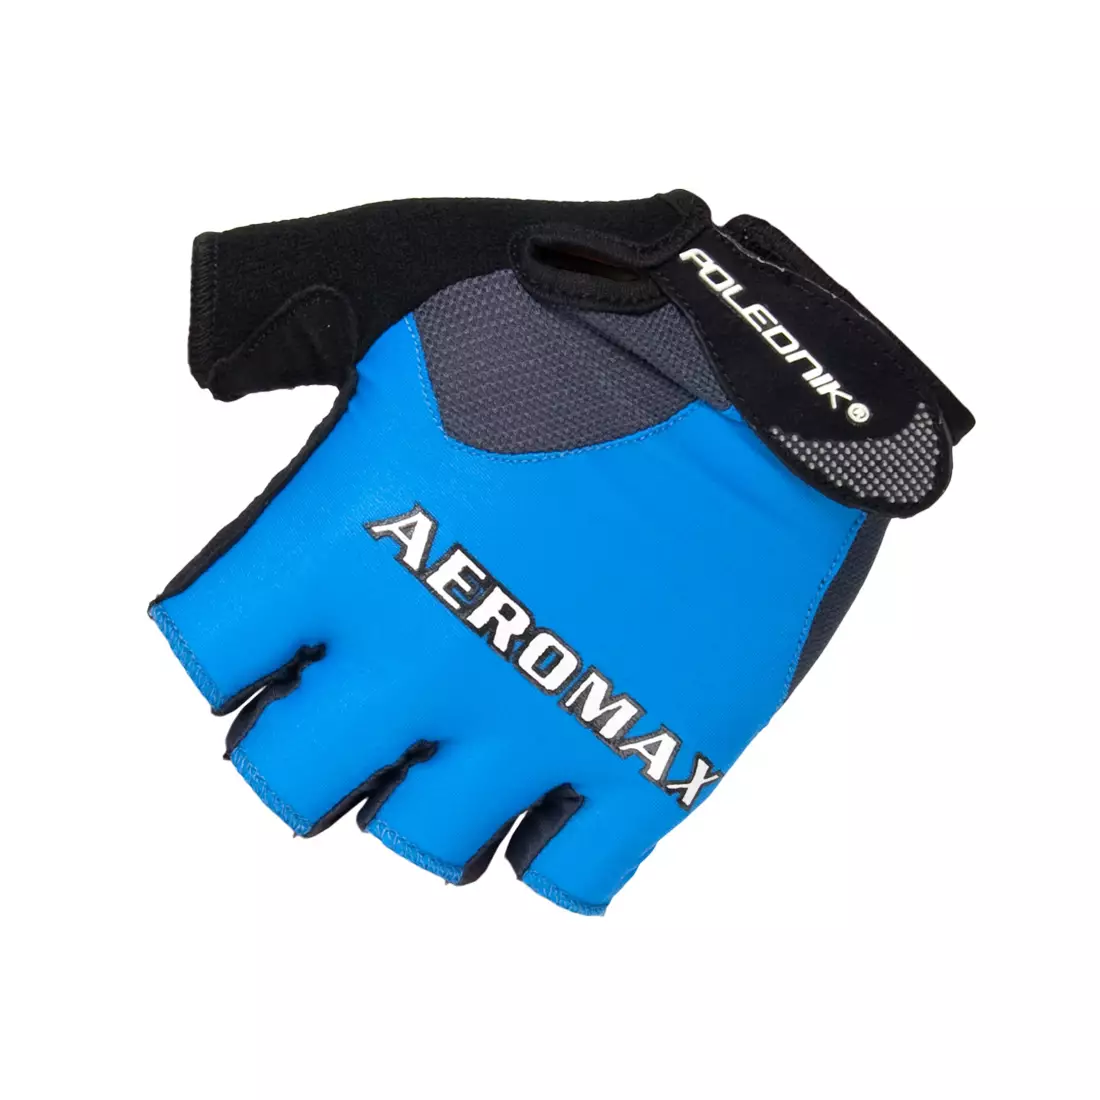 POLEDNIK AEROMAX cycling gloves, color: Blue